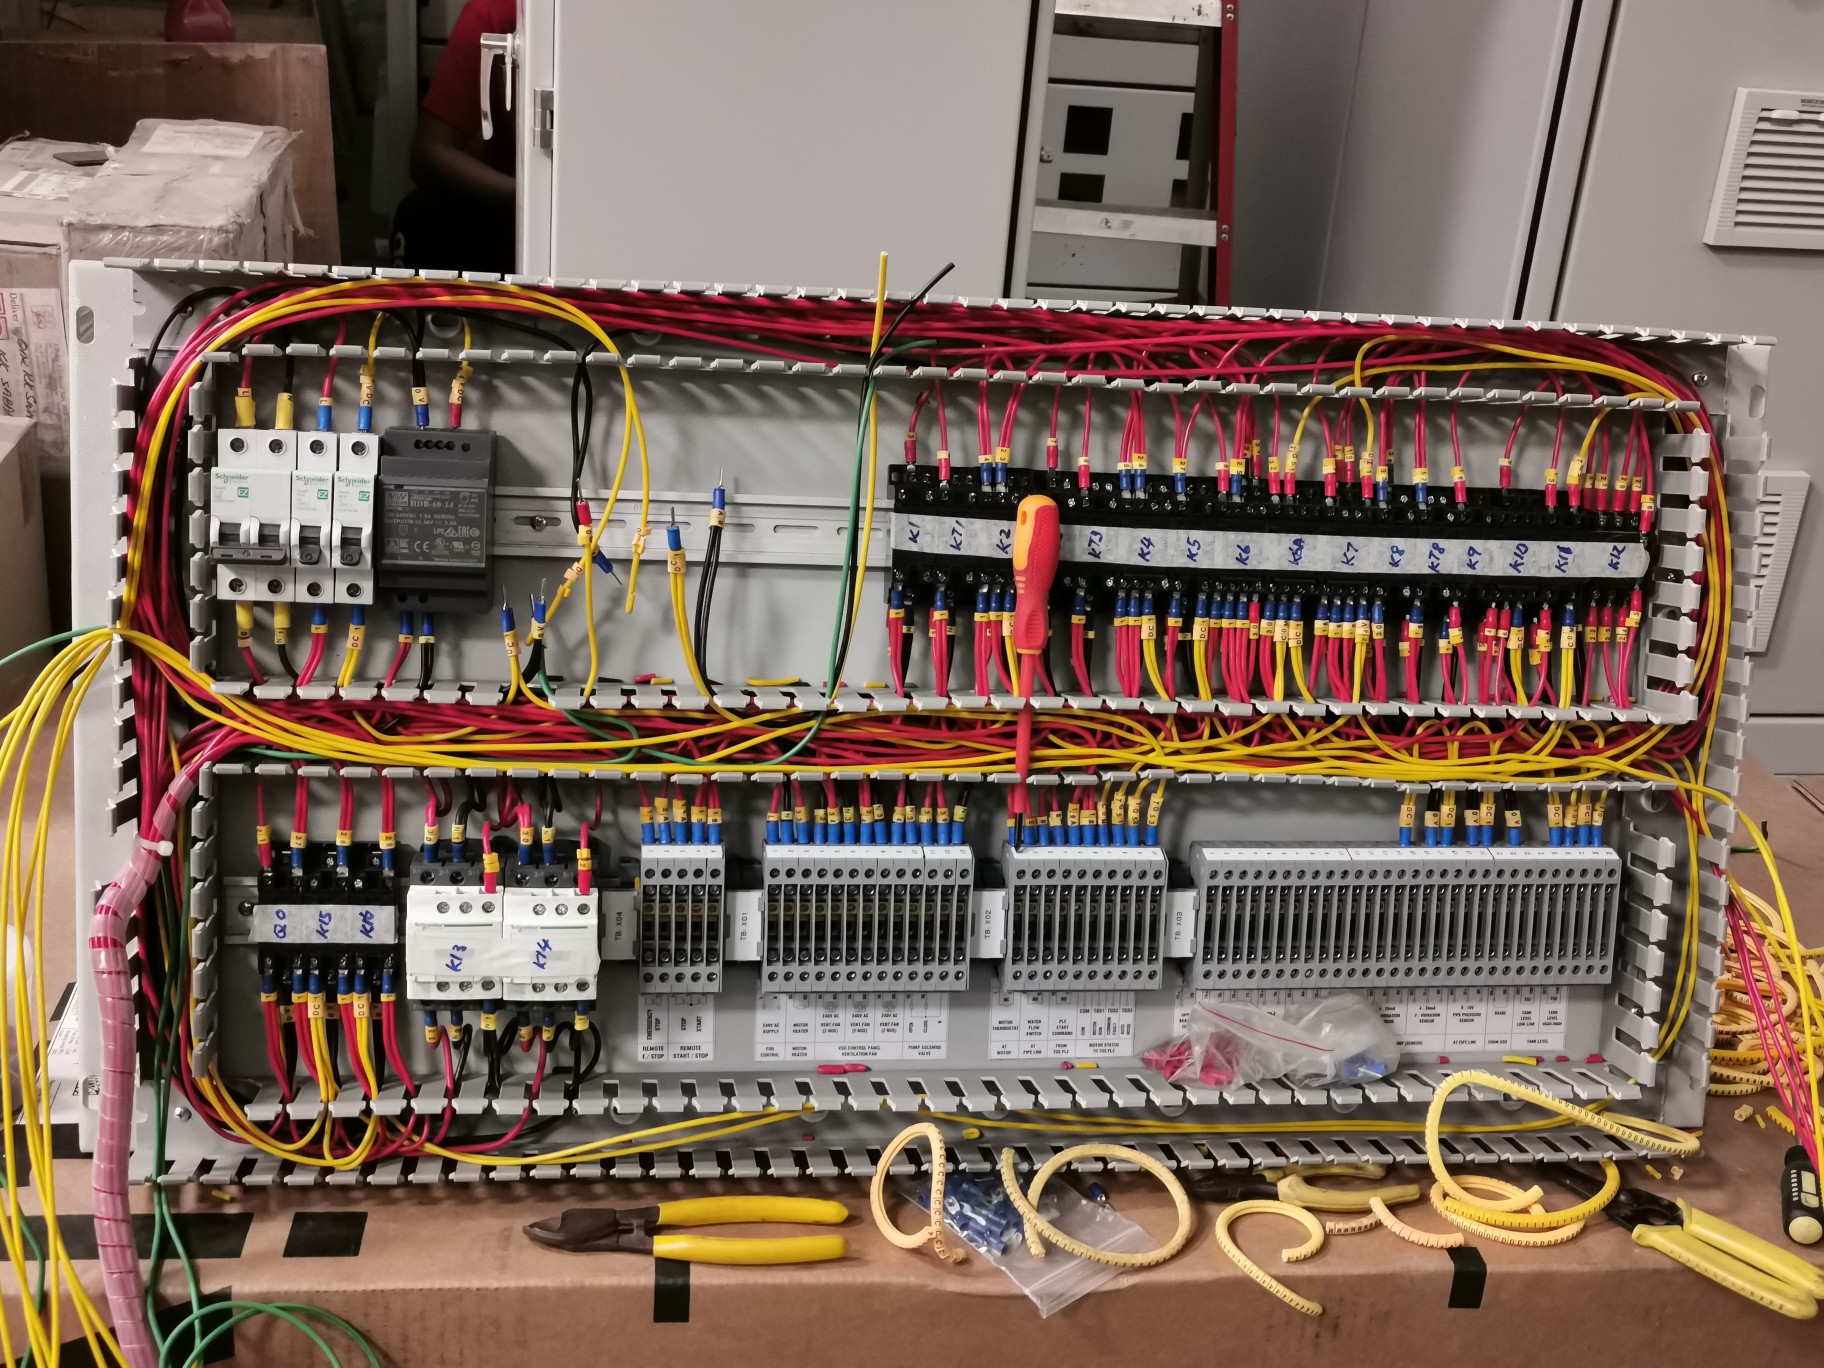 Major Components Of an Electrical Control Panel